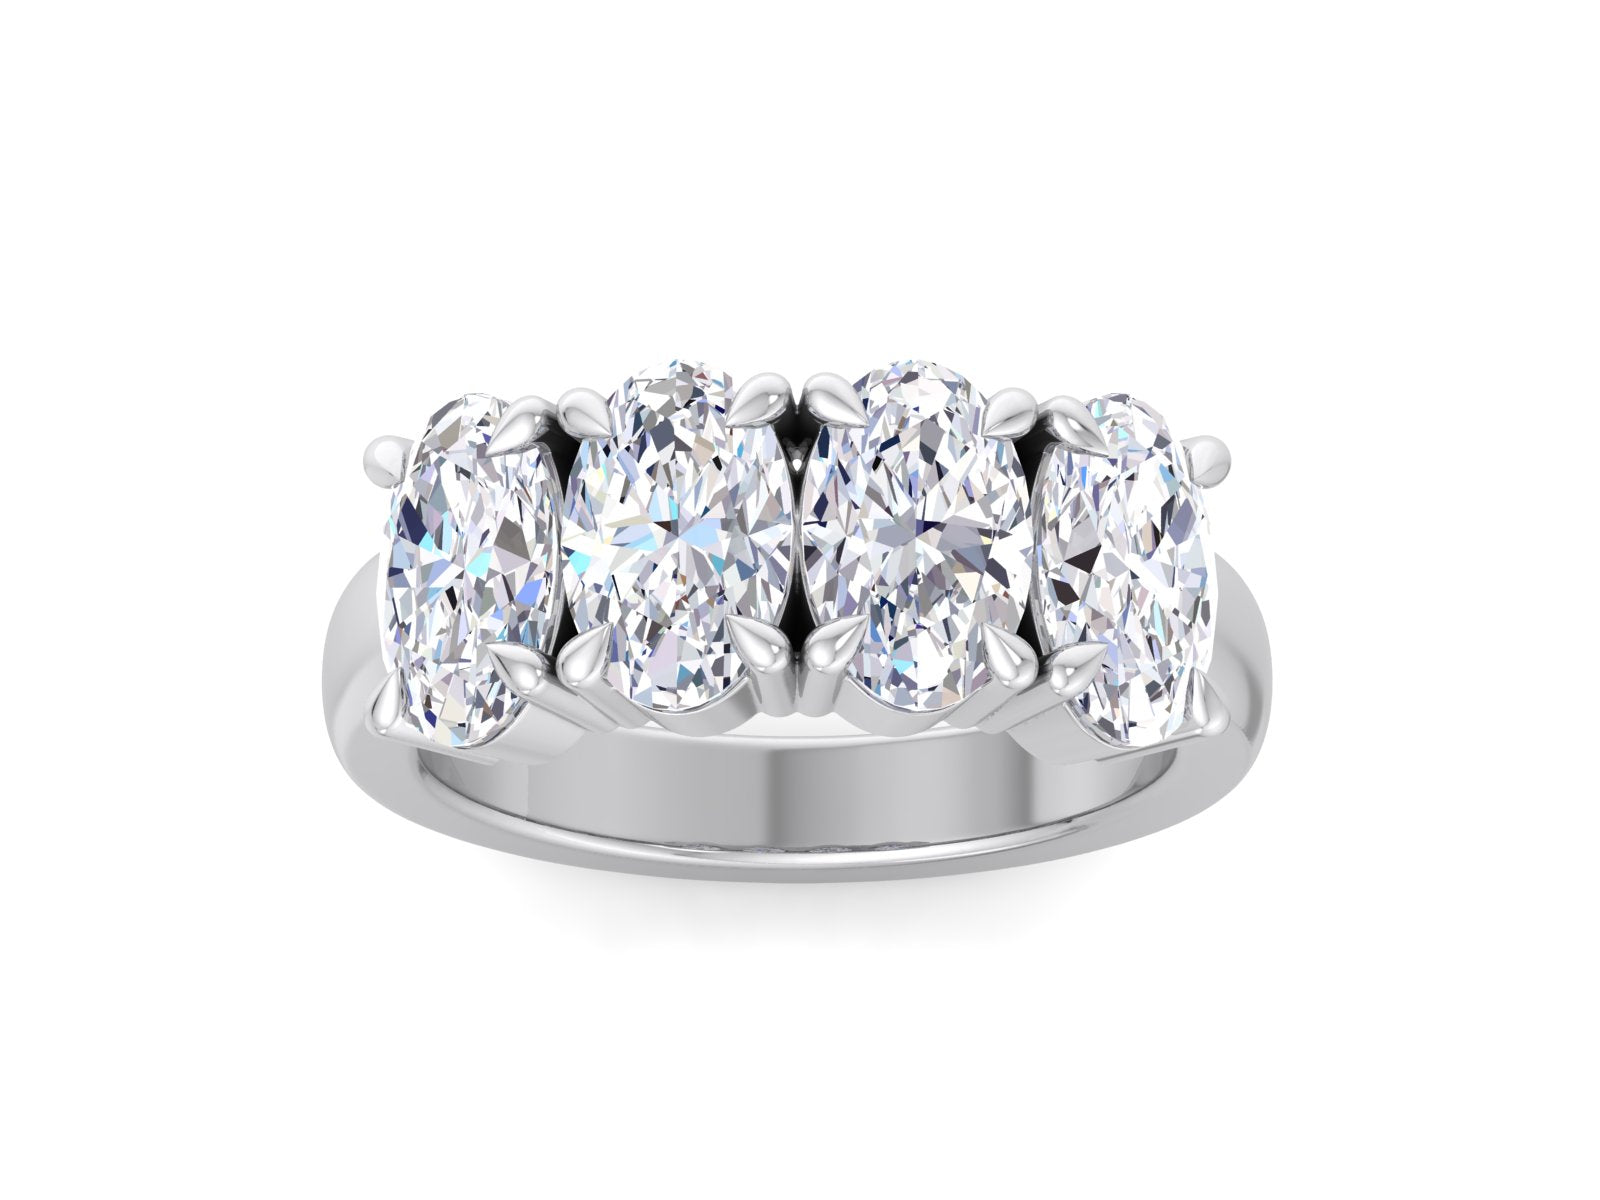 4.00ct Oval cut Moissanite wedding band